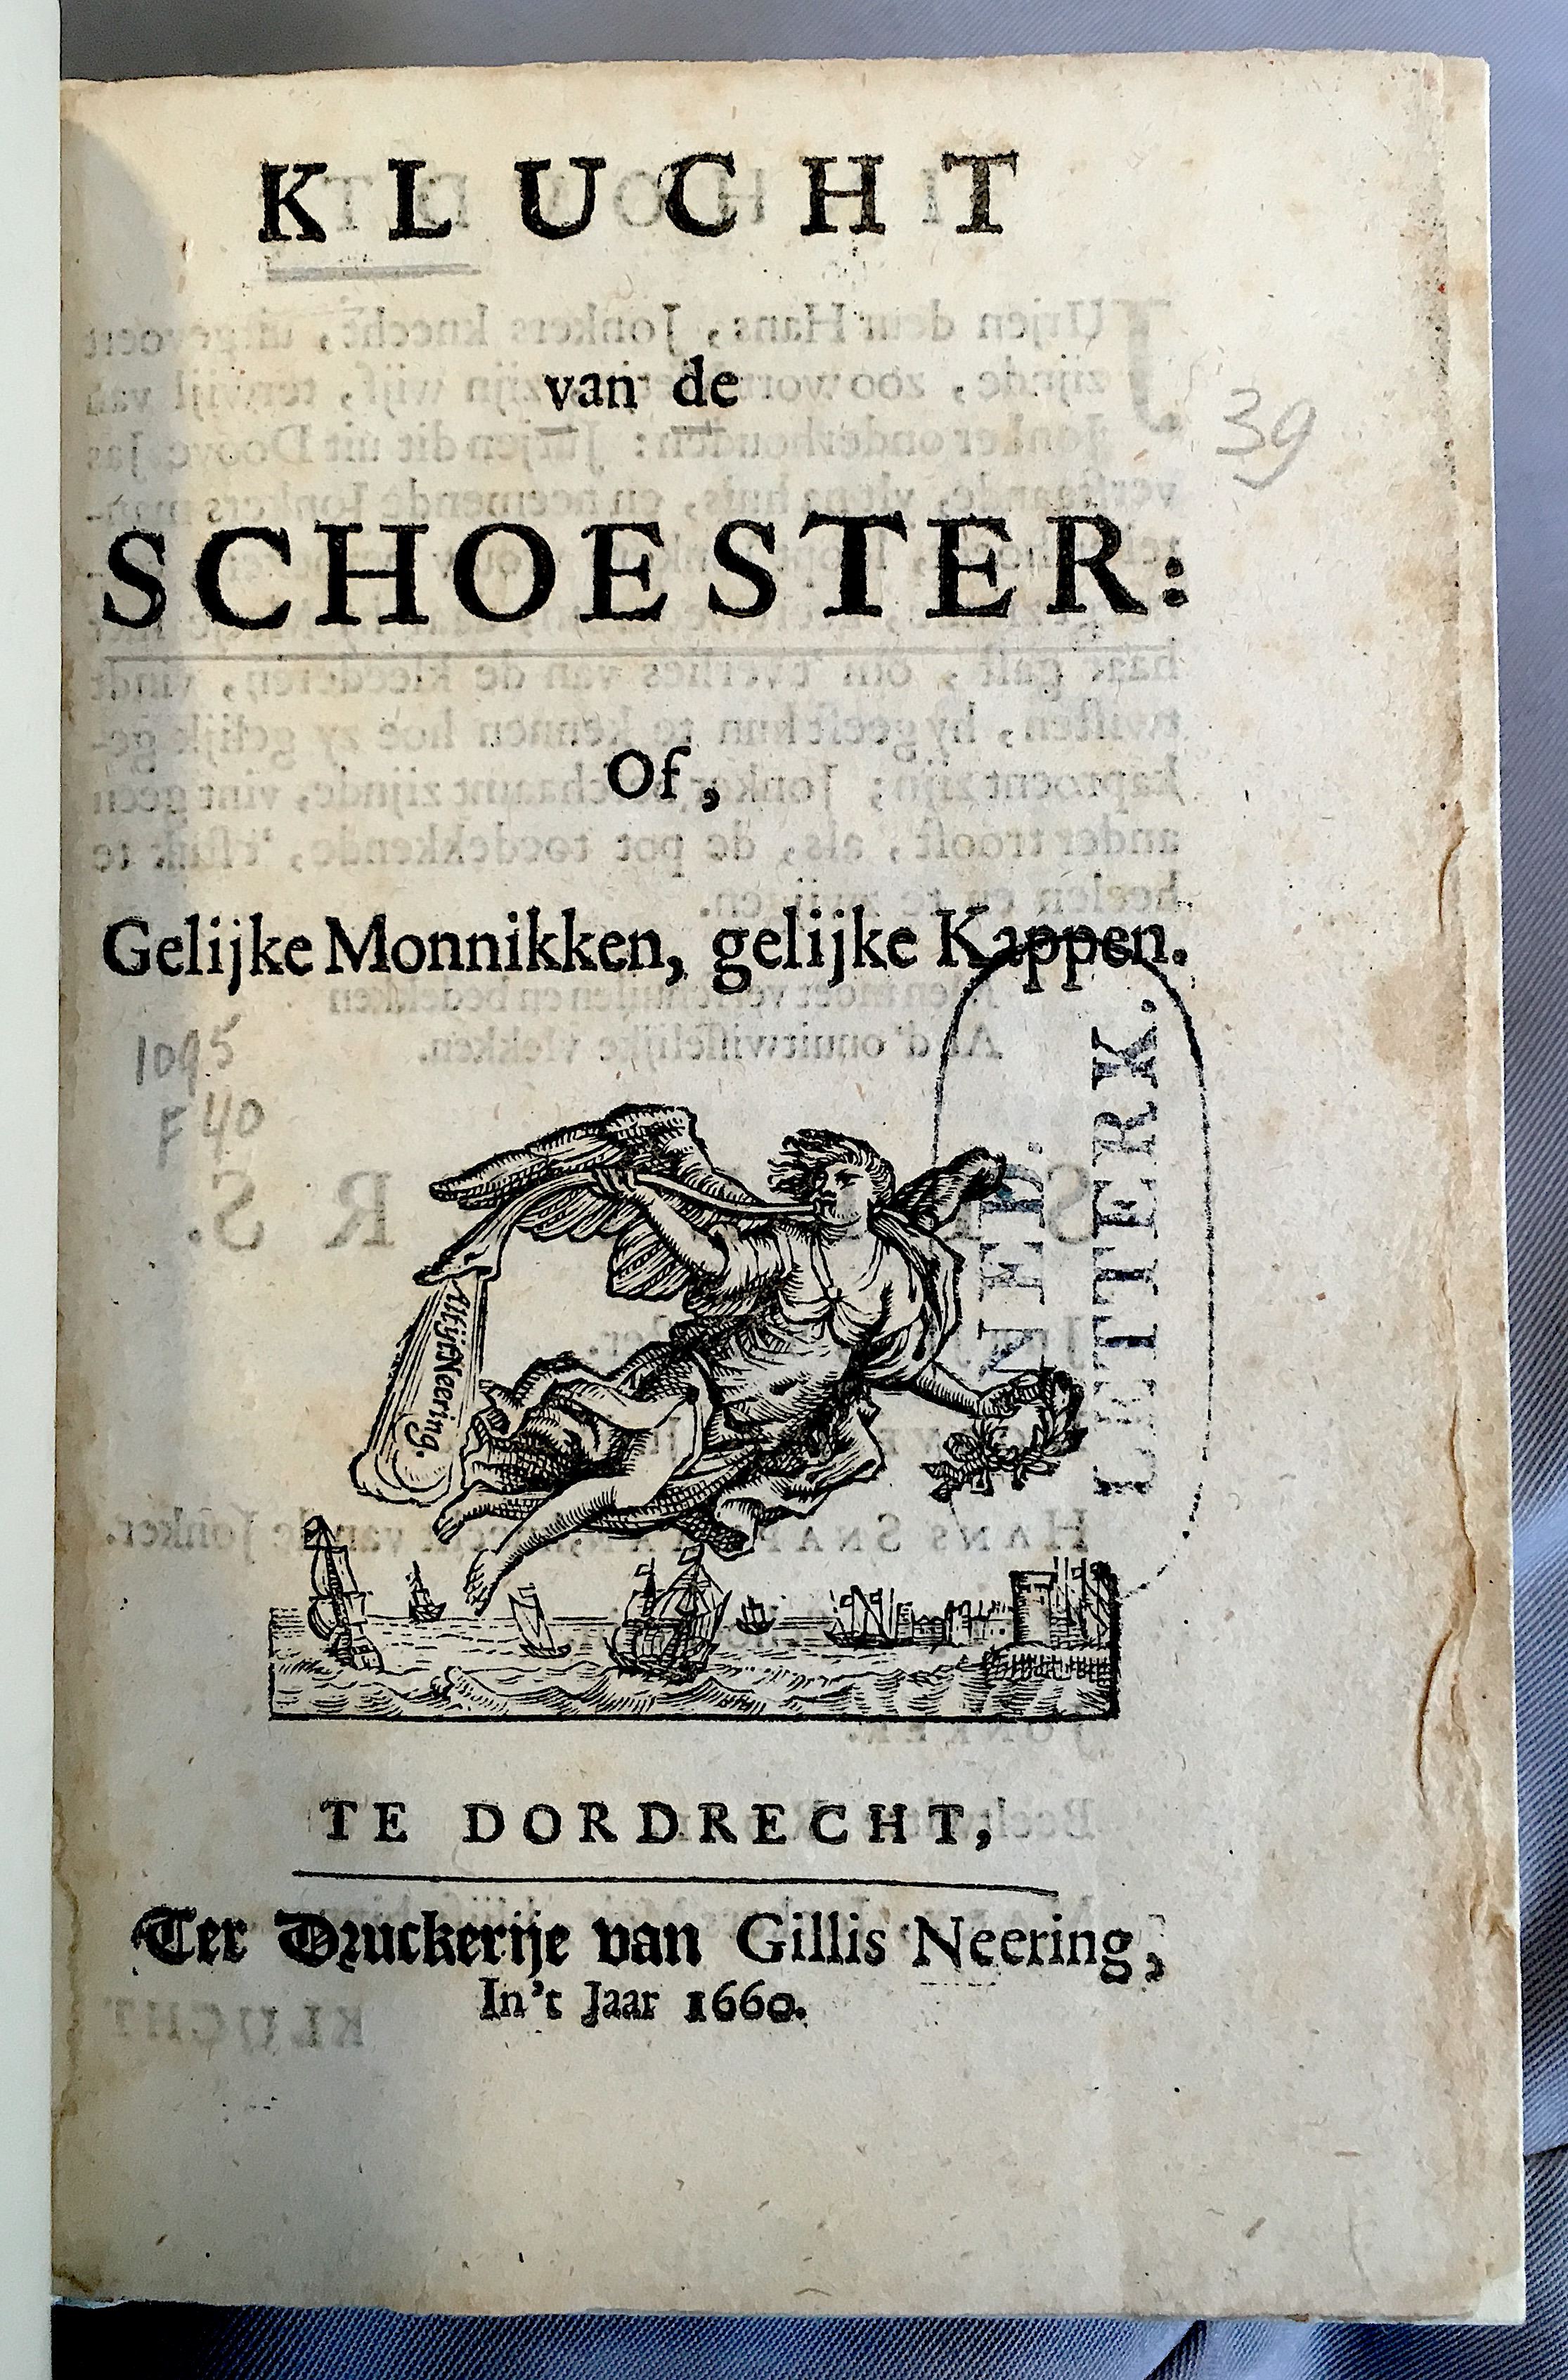 Schoester1660p01